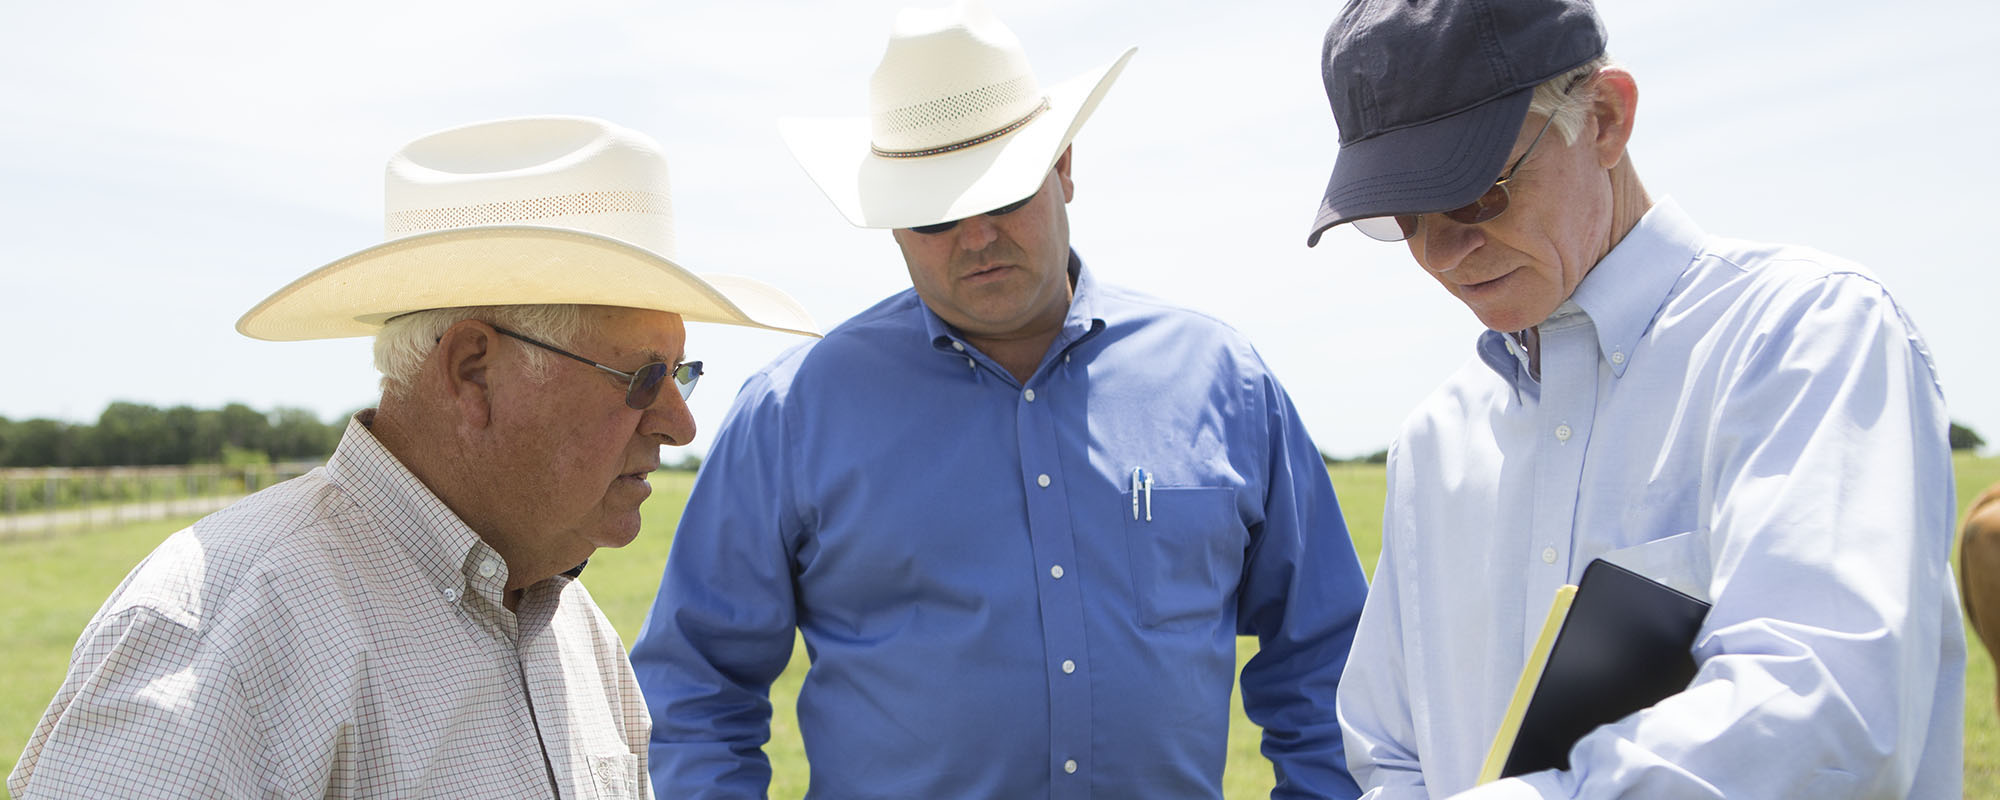 Agriculture consultants talking with a rancher